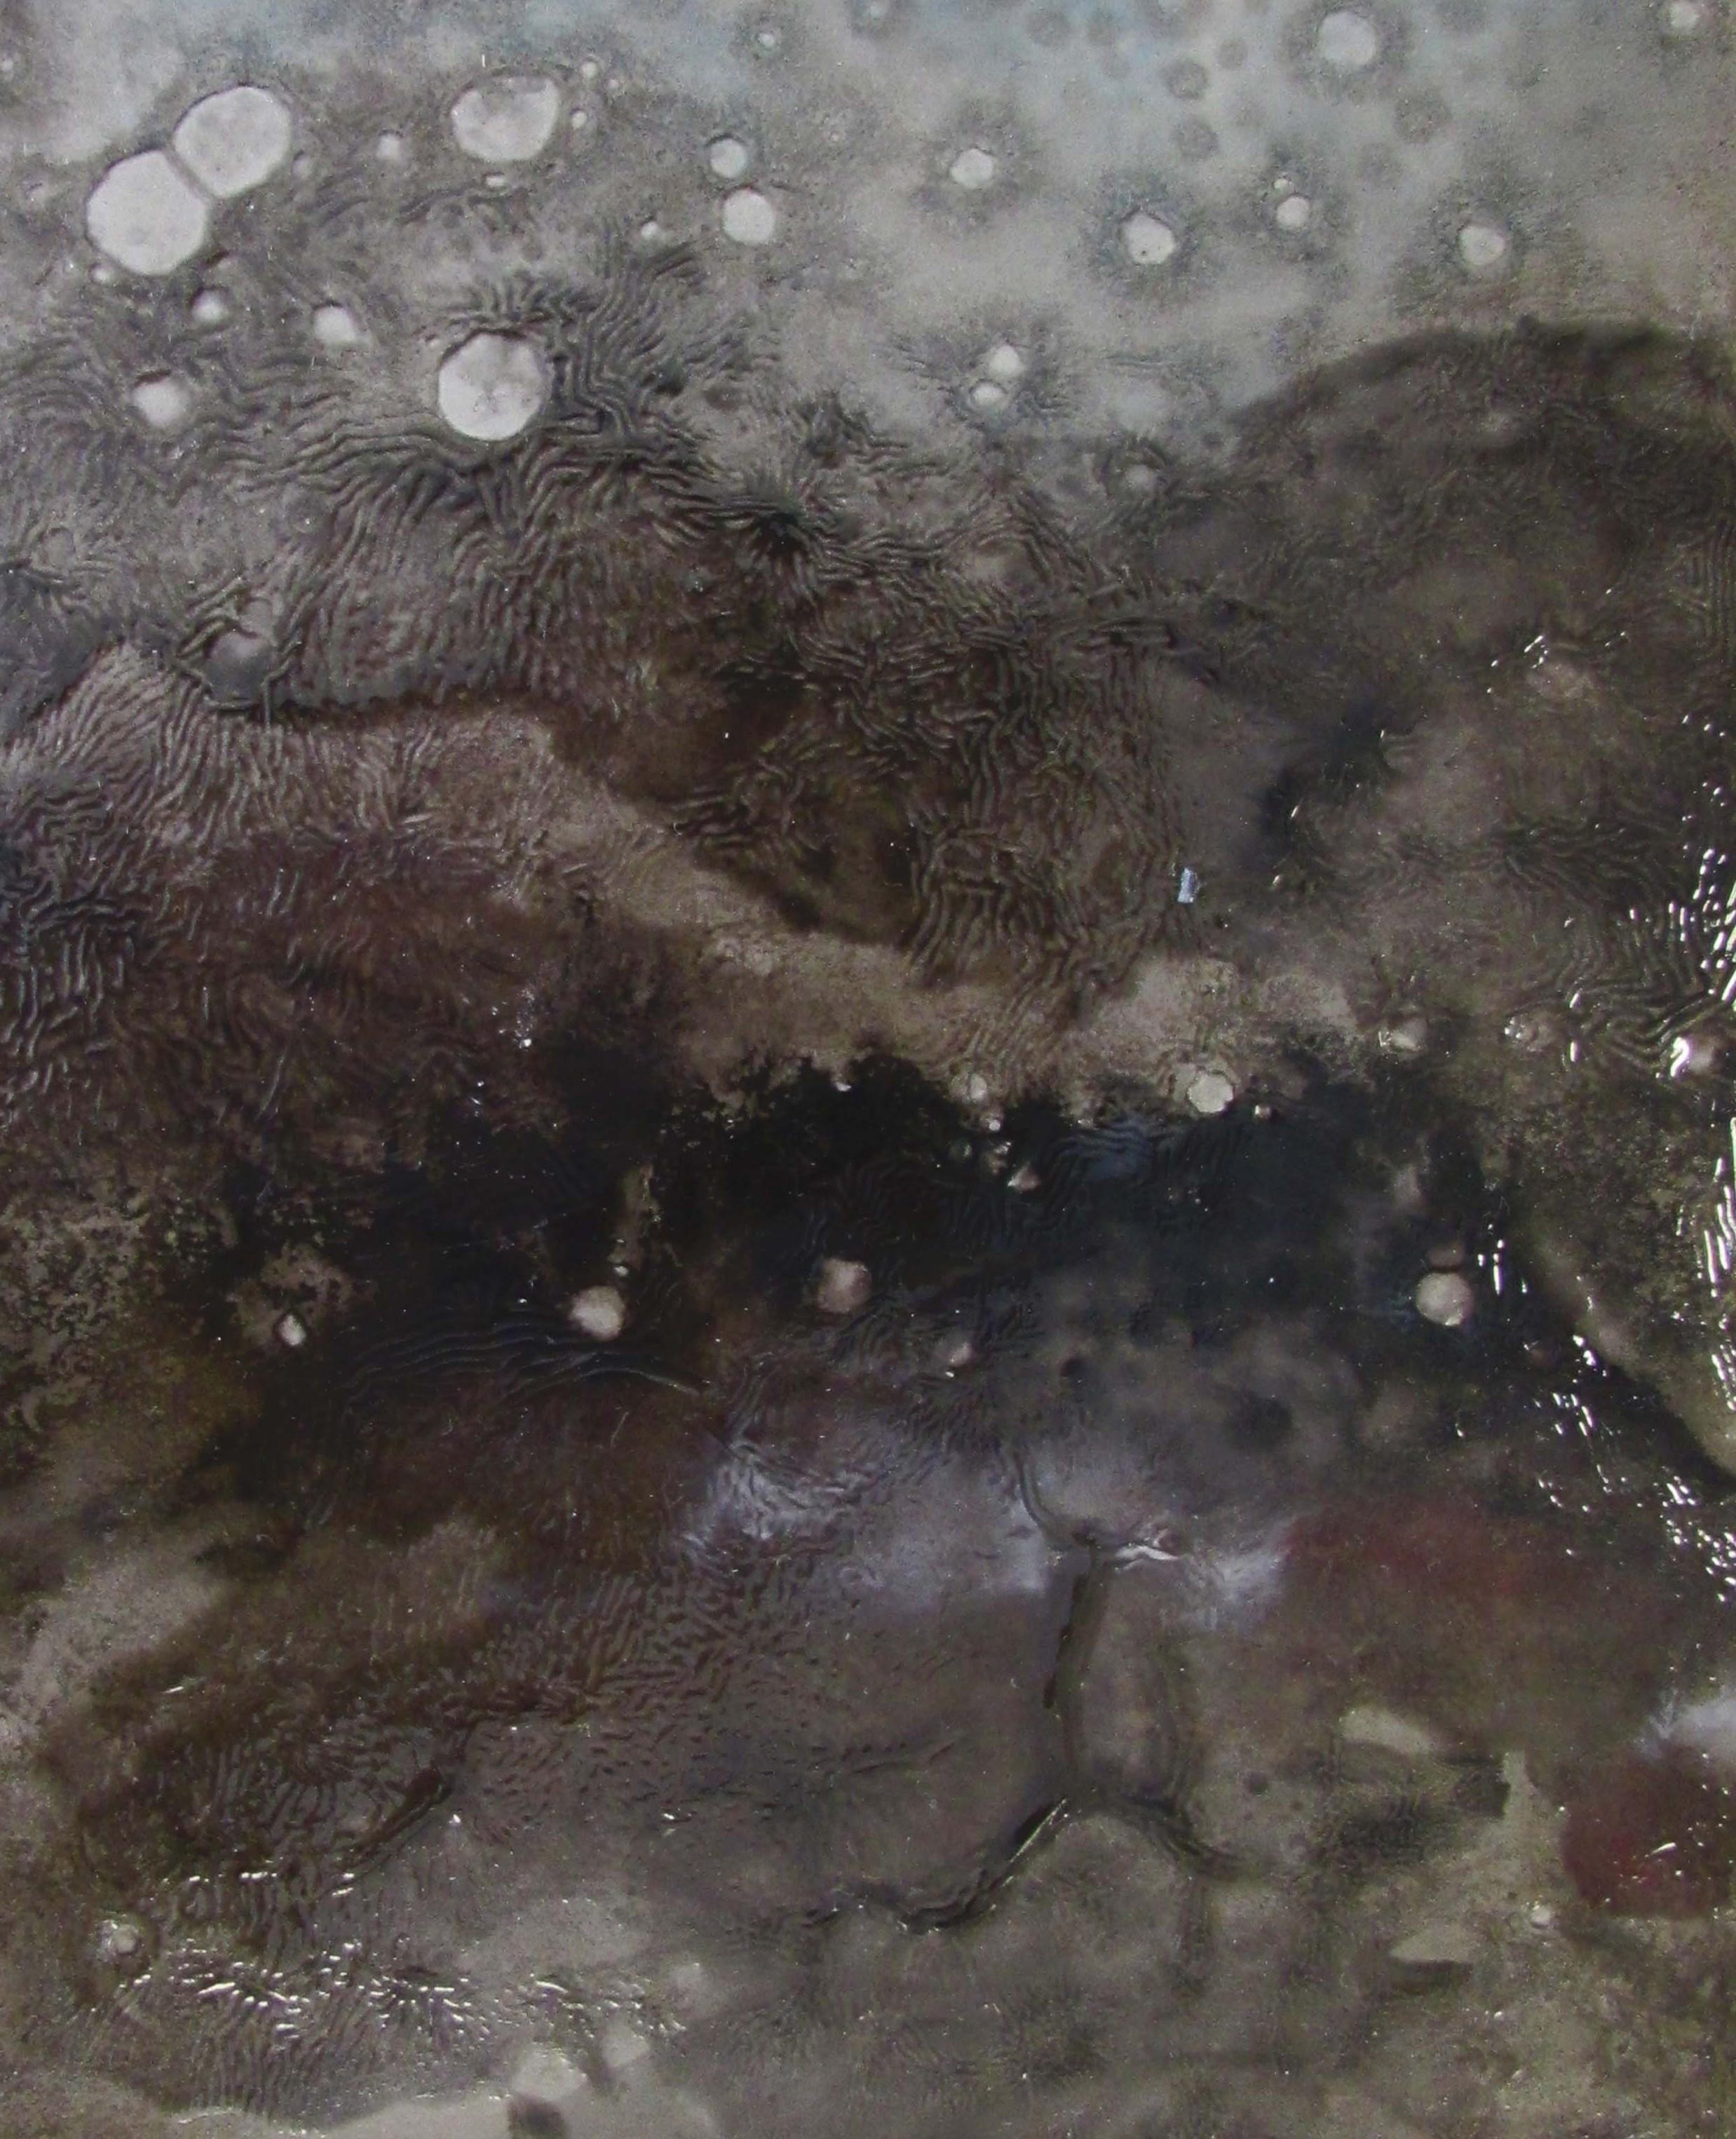 Untitled 01, 2015 - 2016
Mixed technique: oil paint, adhesive, silicone on metal sheet
(Signed on reverse)
9 27/32 H x 7 7/8 W in
25 H x 20 W cm


Zsolt Berszán’s work speaks of repulsion and fascination and at the same time speaks about shapes that